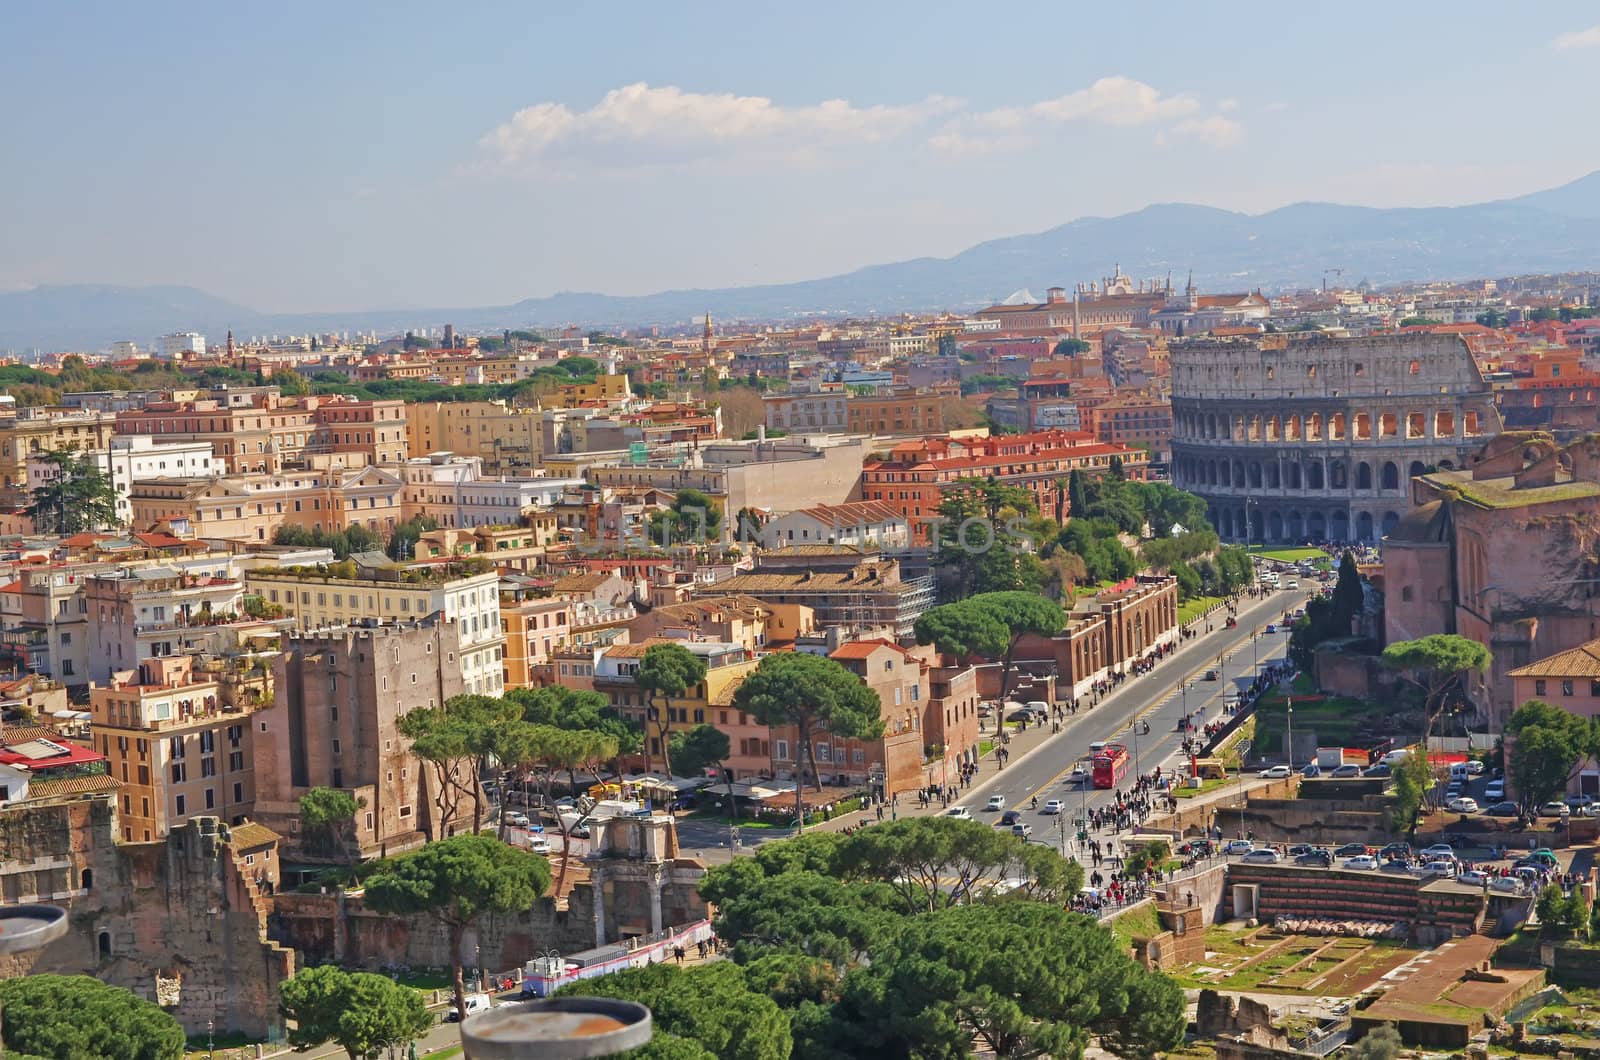 Rome cityscape with Colosseum in the center